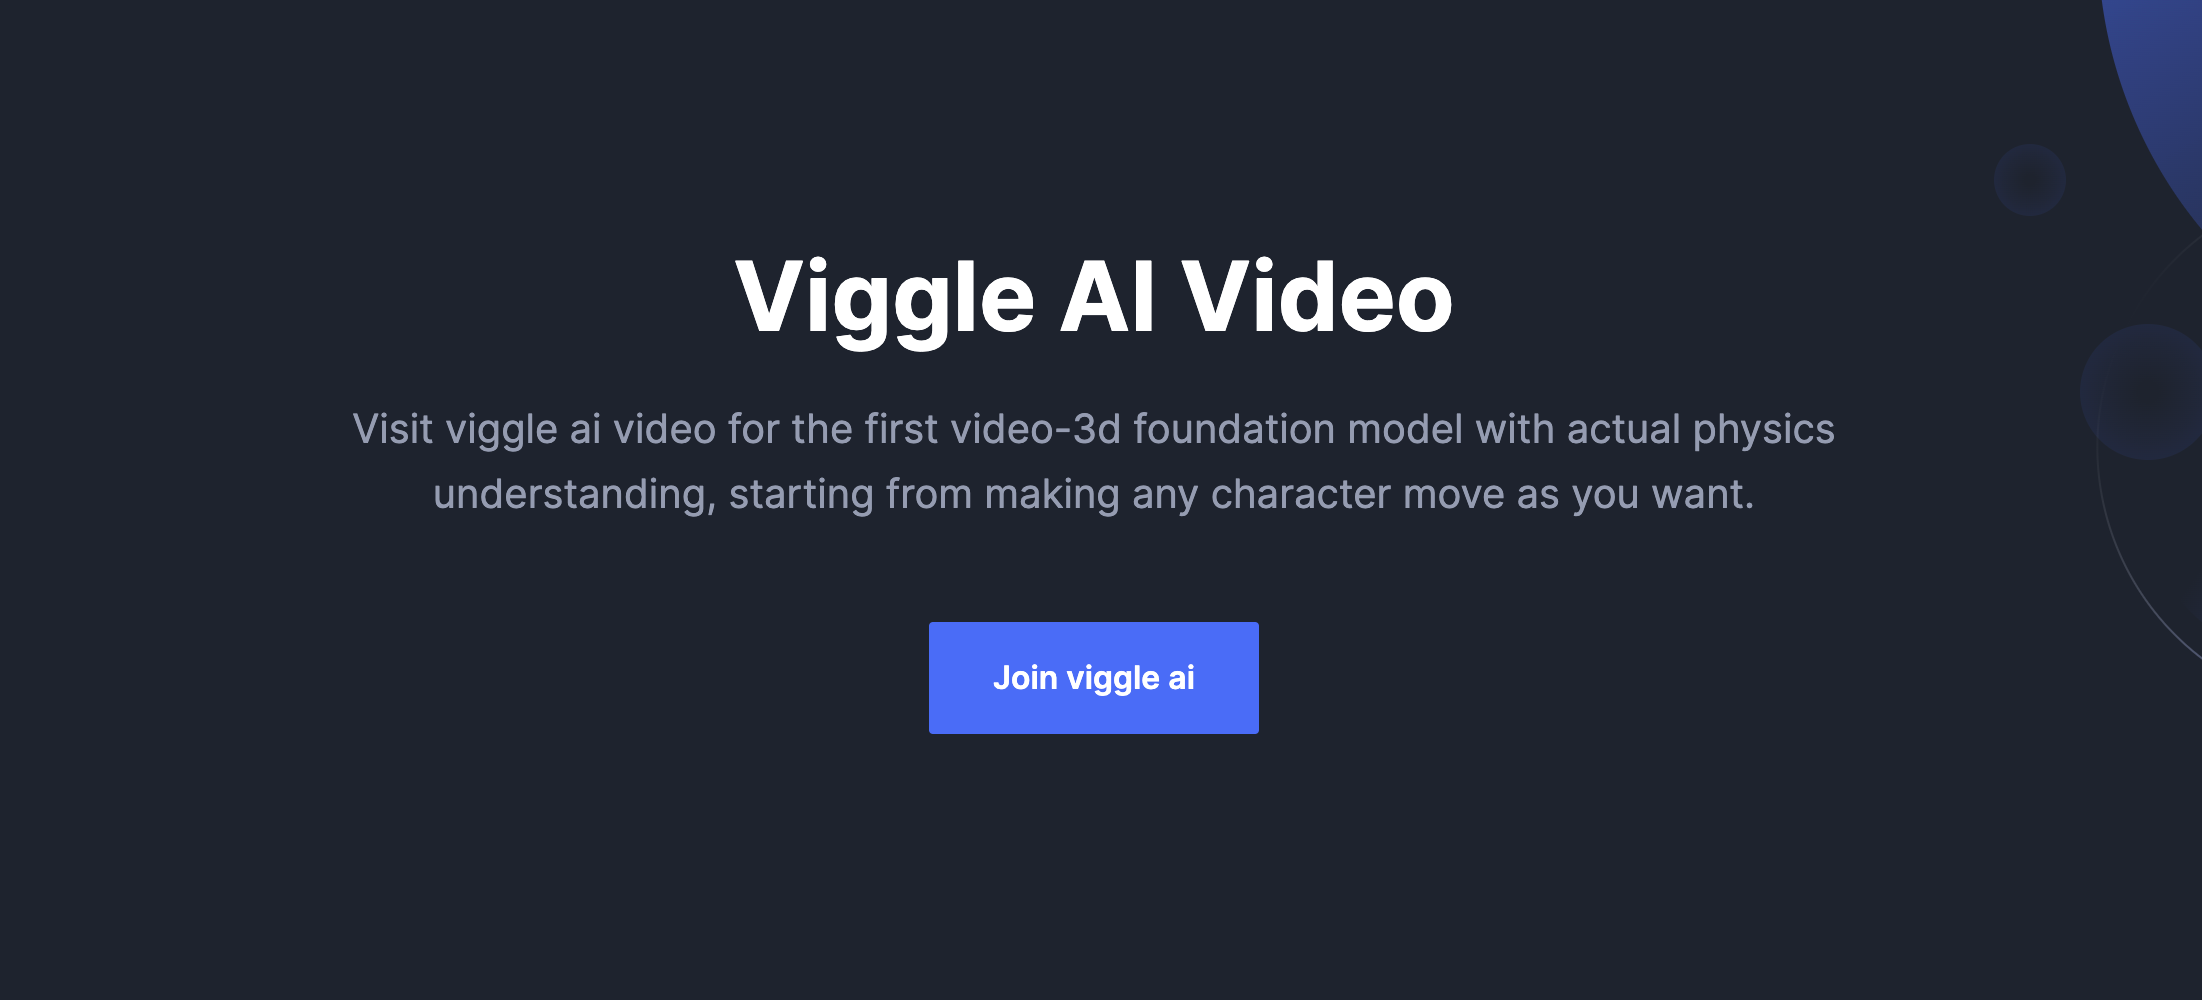 The open source webui for viggle ai video